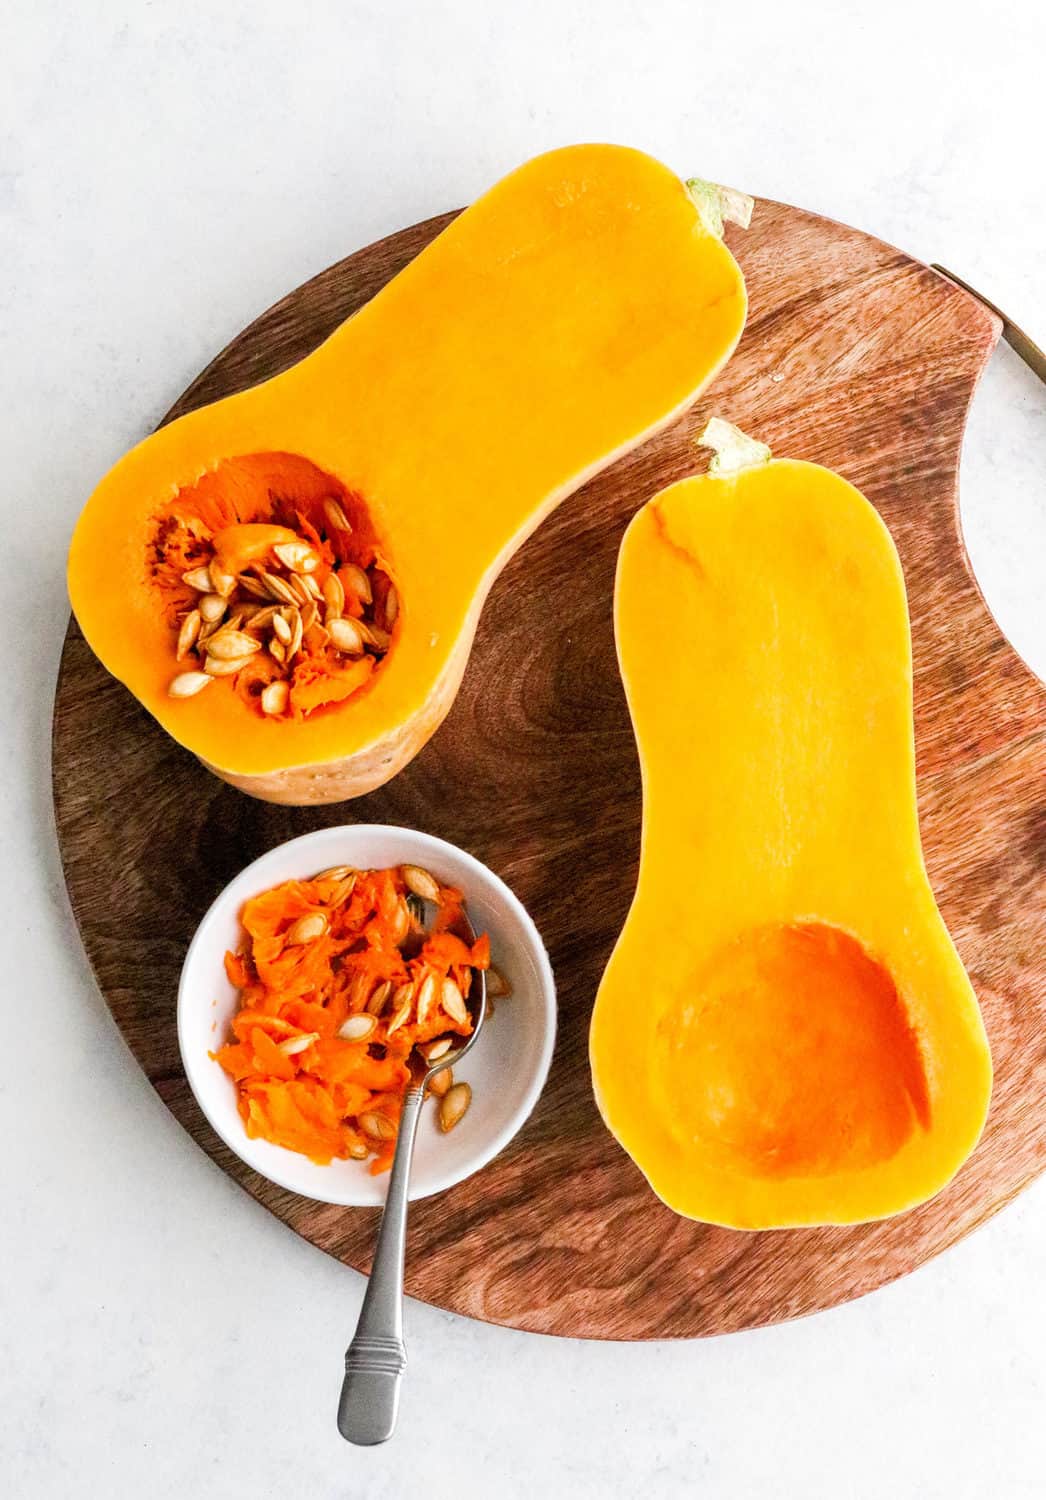 Two halves of butternut squash on a round wooden board on a white surface with a round white bowl with seeds of of the squash and a spoon in it on the board next to the squash.